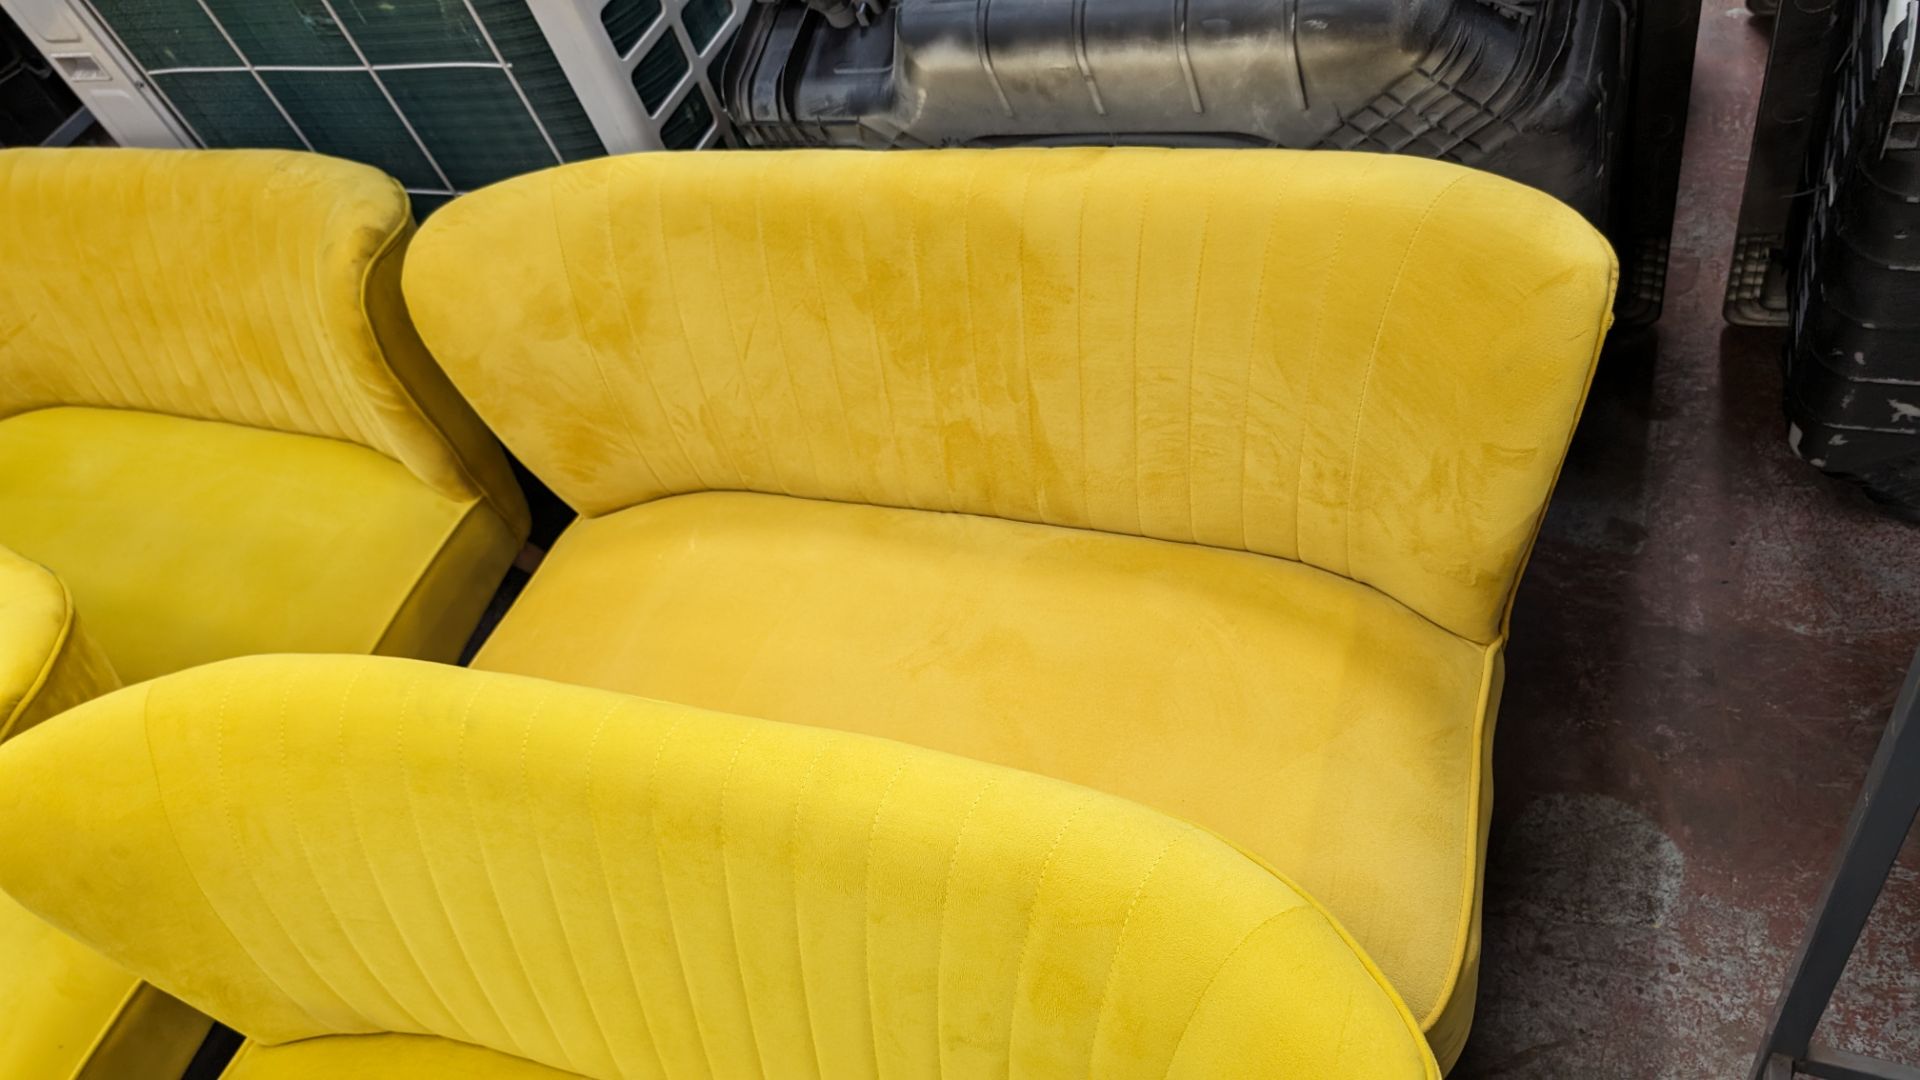 Pair of mustard yellow velour two-person small sofas, each measuring approximately 1120mm wide - Image 4 of 6